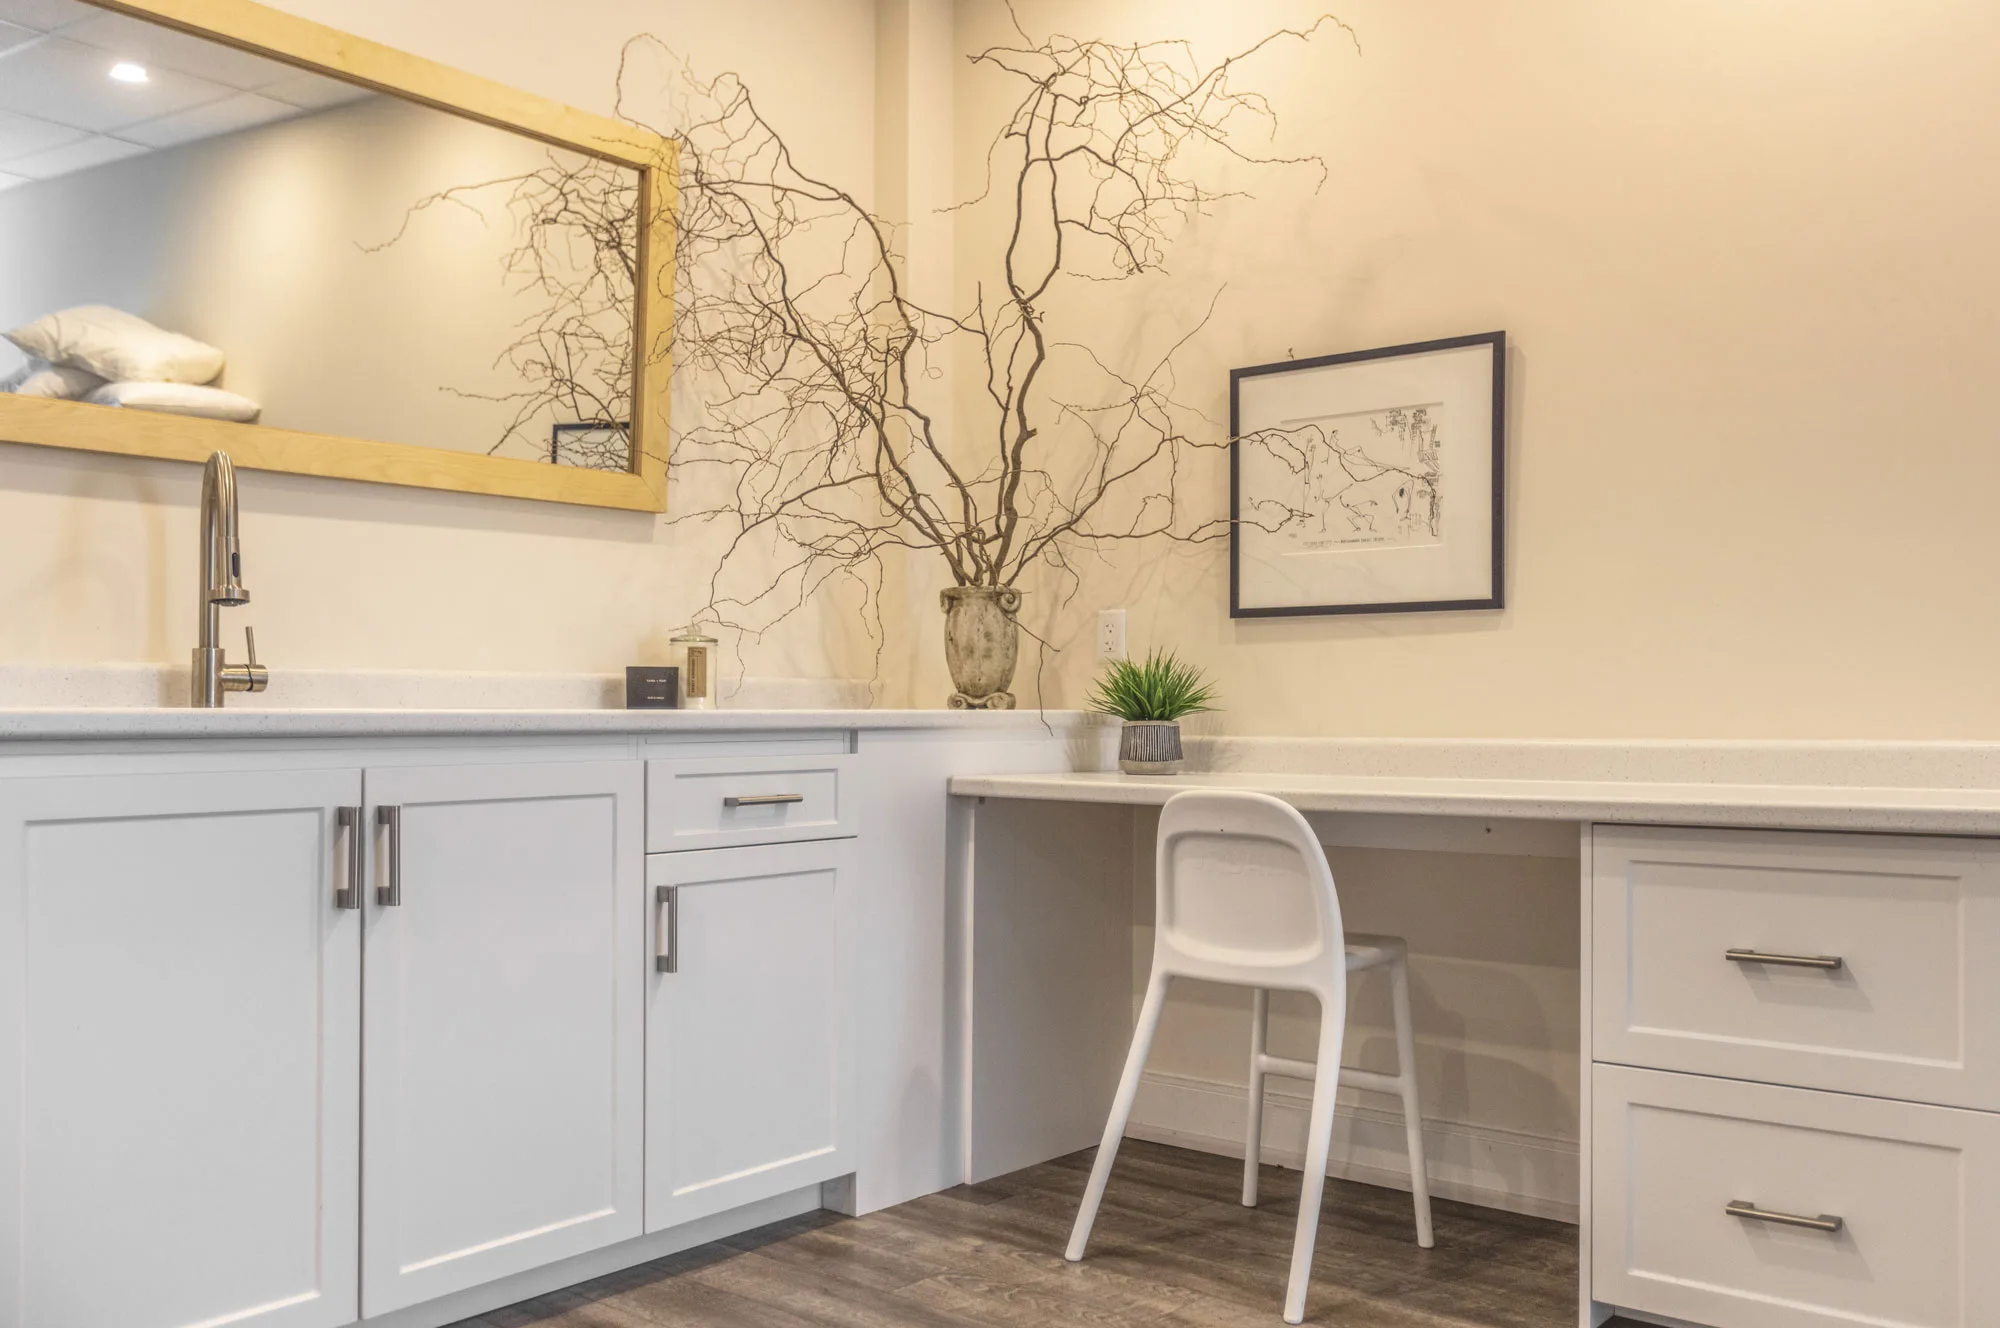 A white cupboard reception area with a white chair and area with sink